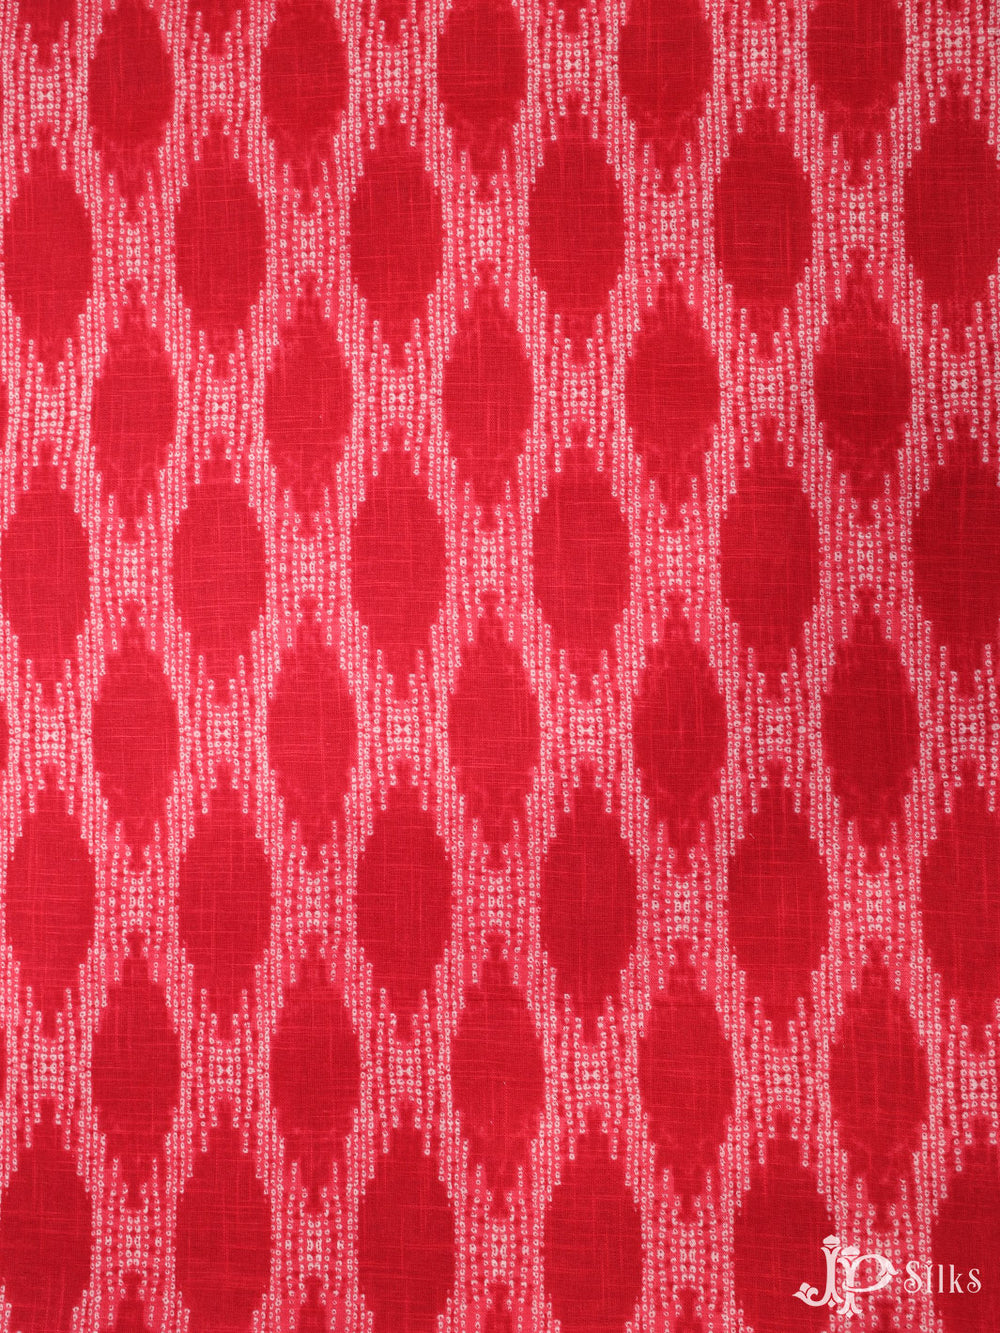 Red Pochampally Ikat Cotton Fabric - D1772 - View 1